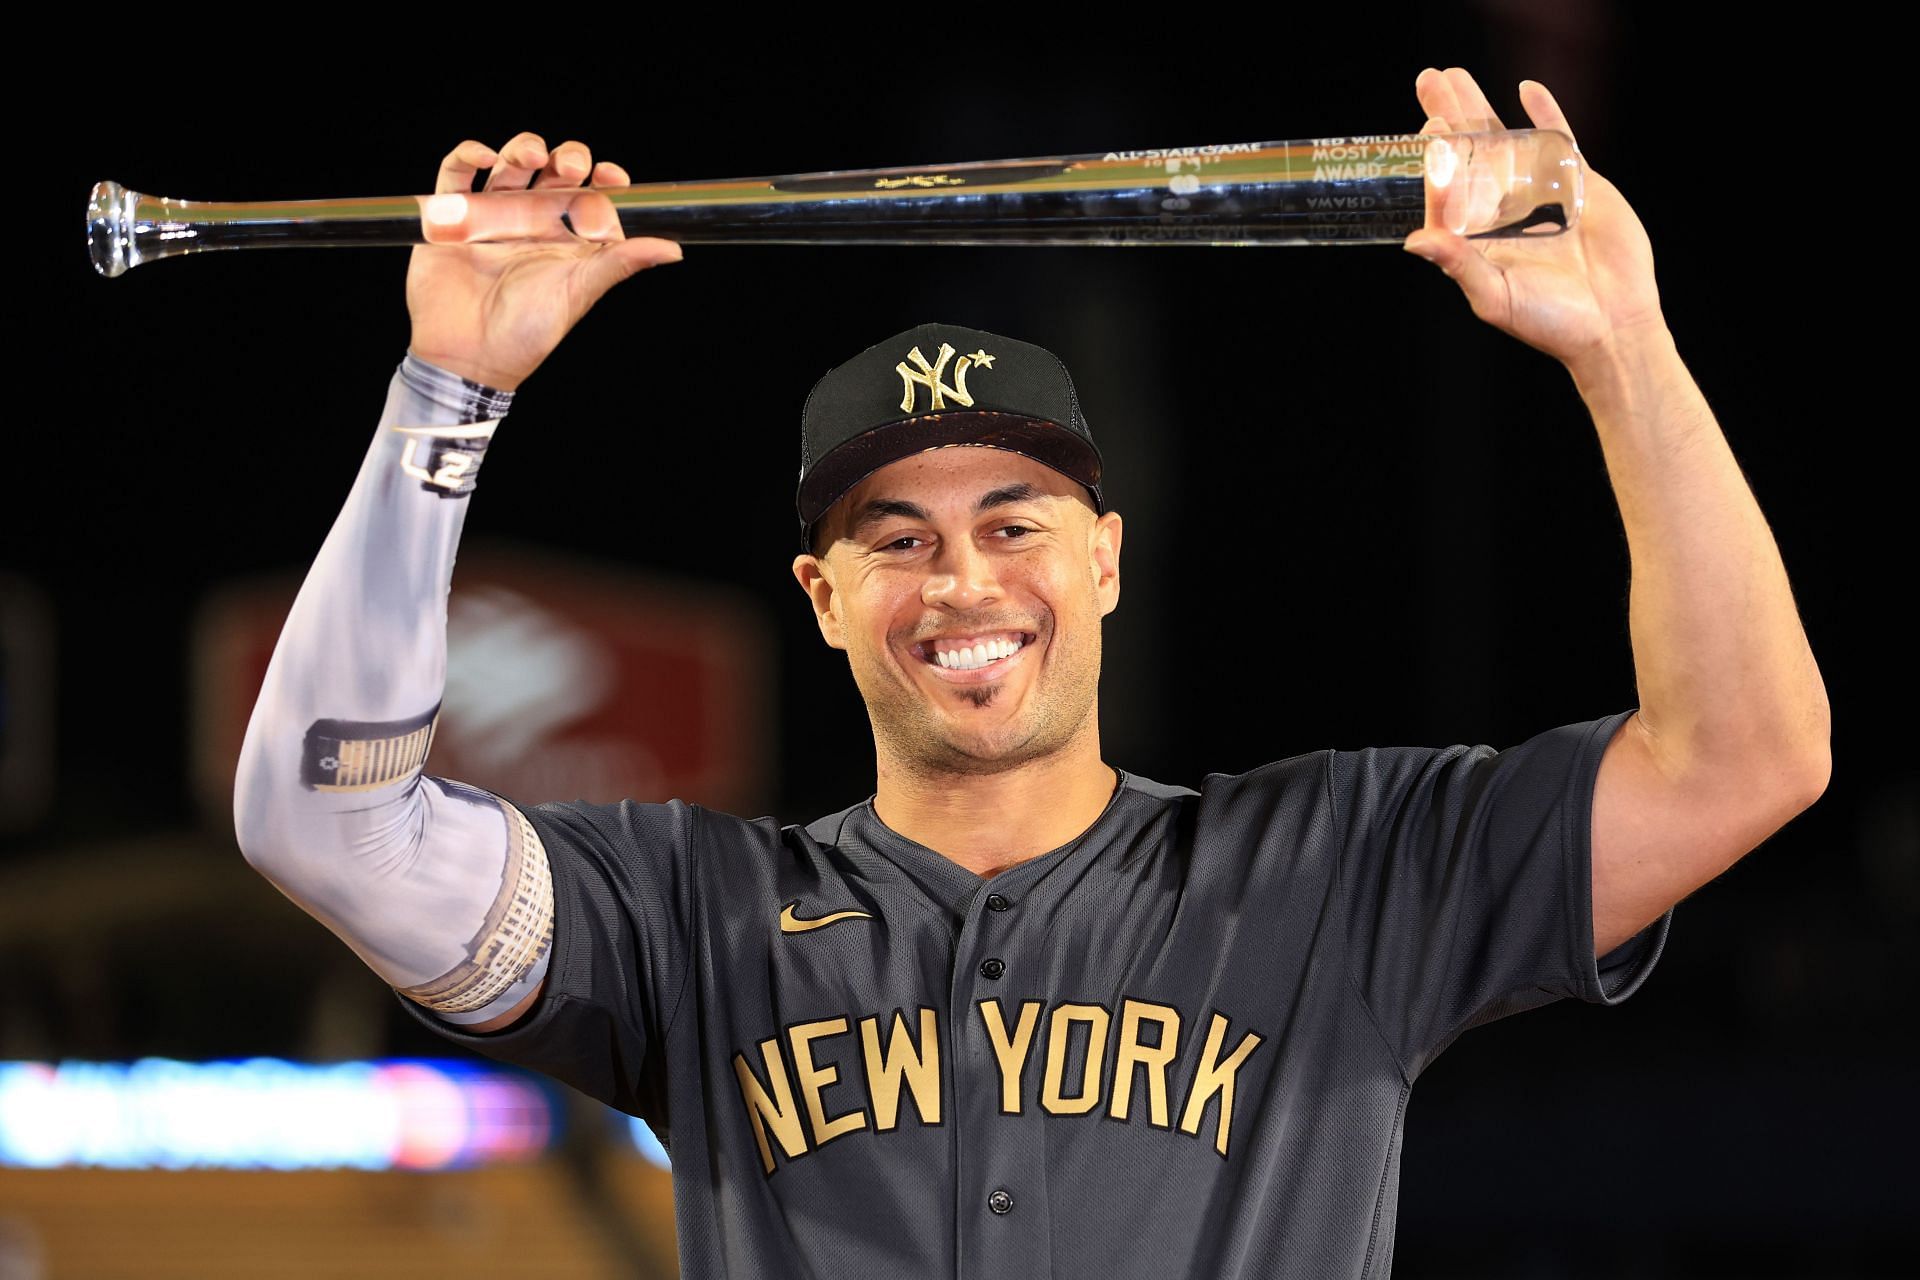 Giancarlo Stanton was awarded the MVP honors at the All-Star Game on Tuesday.